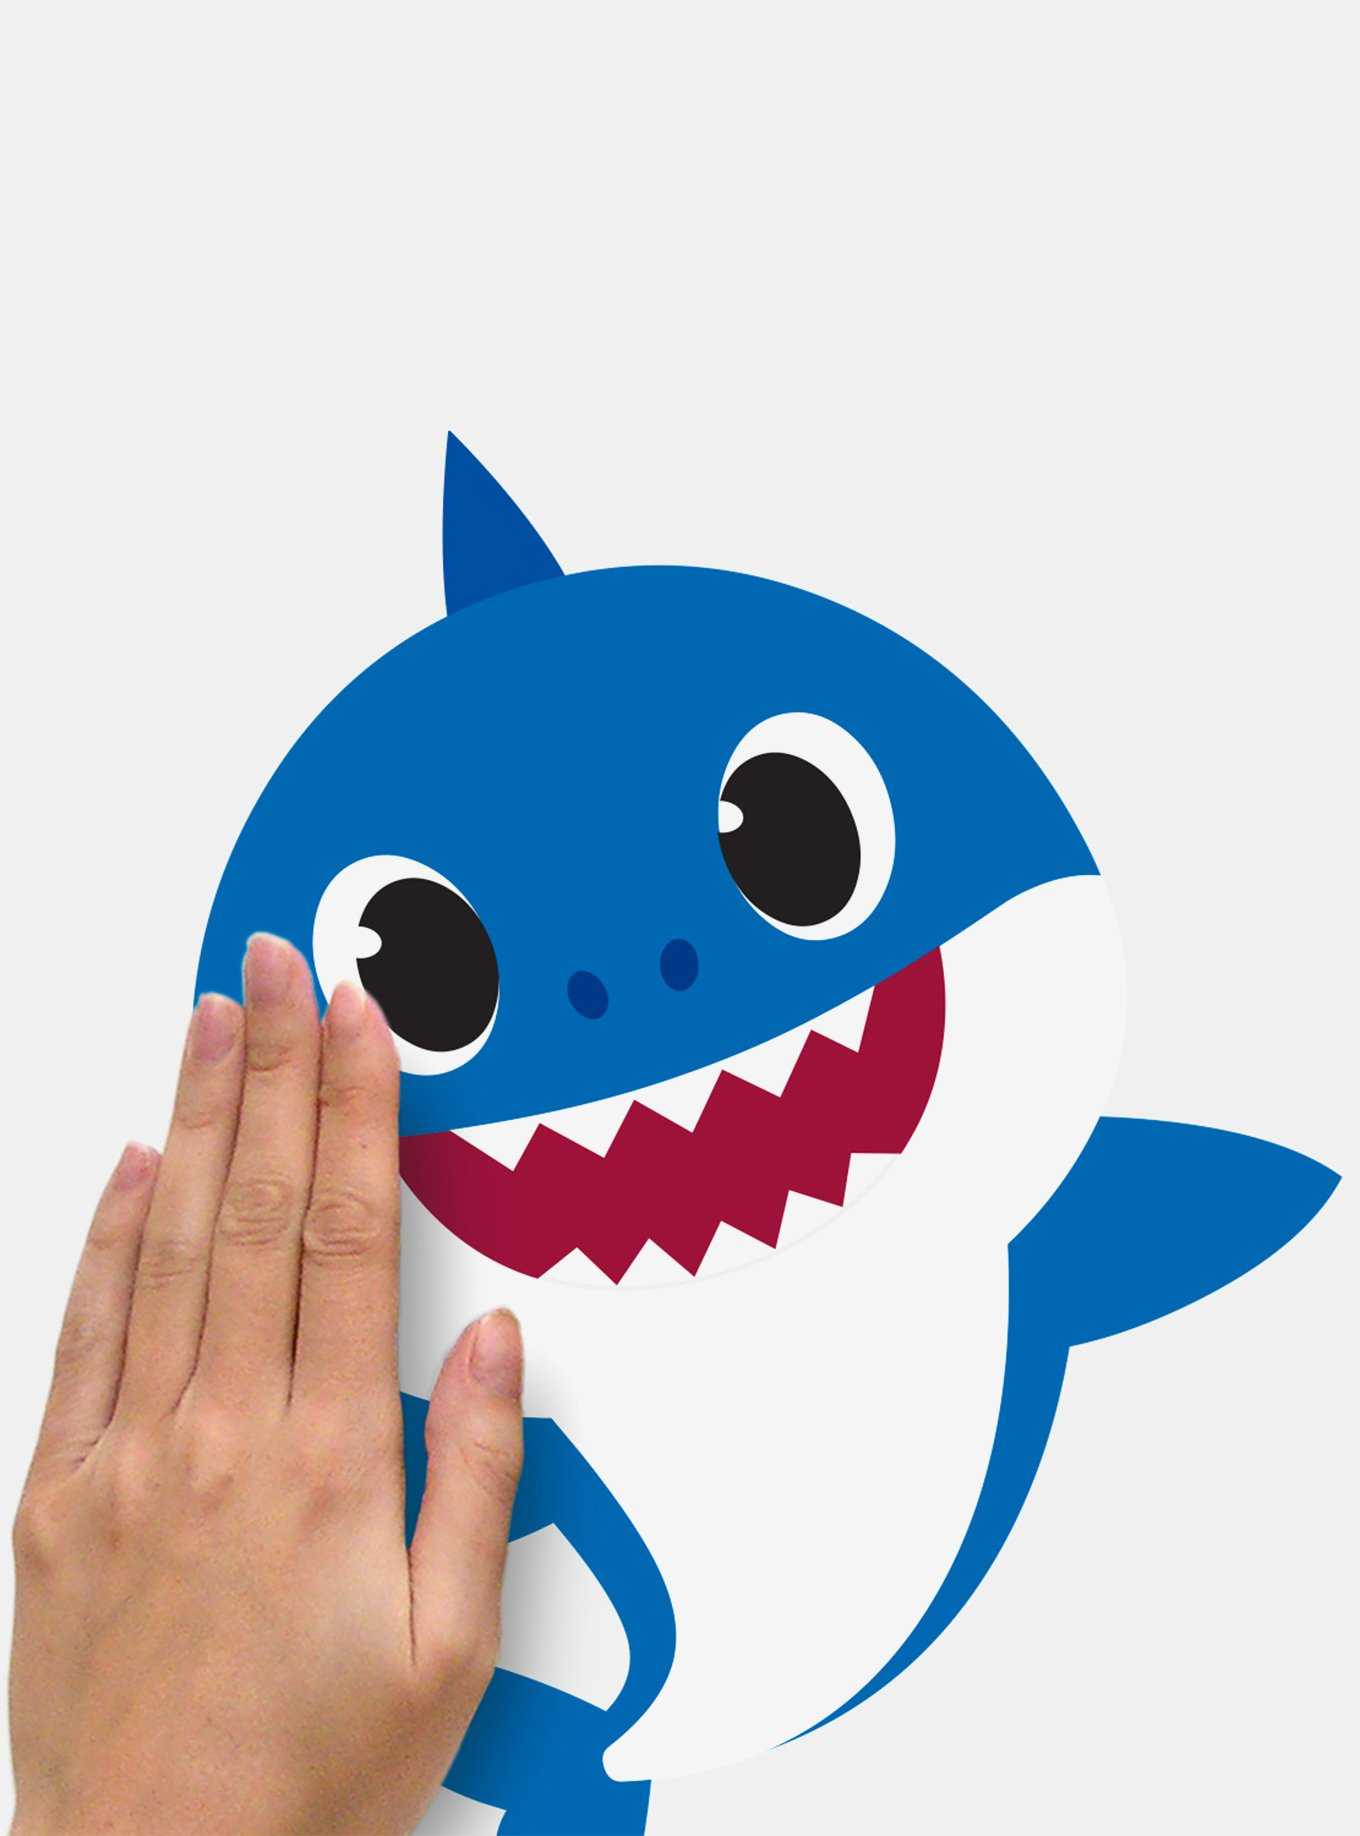 Baby Shark Peel And Stick Wall Decals, , hi-res